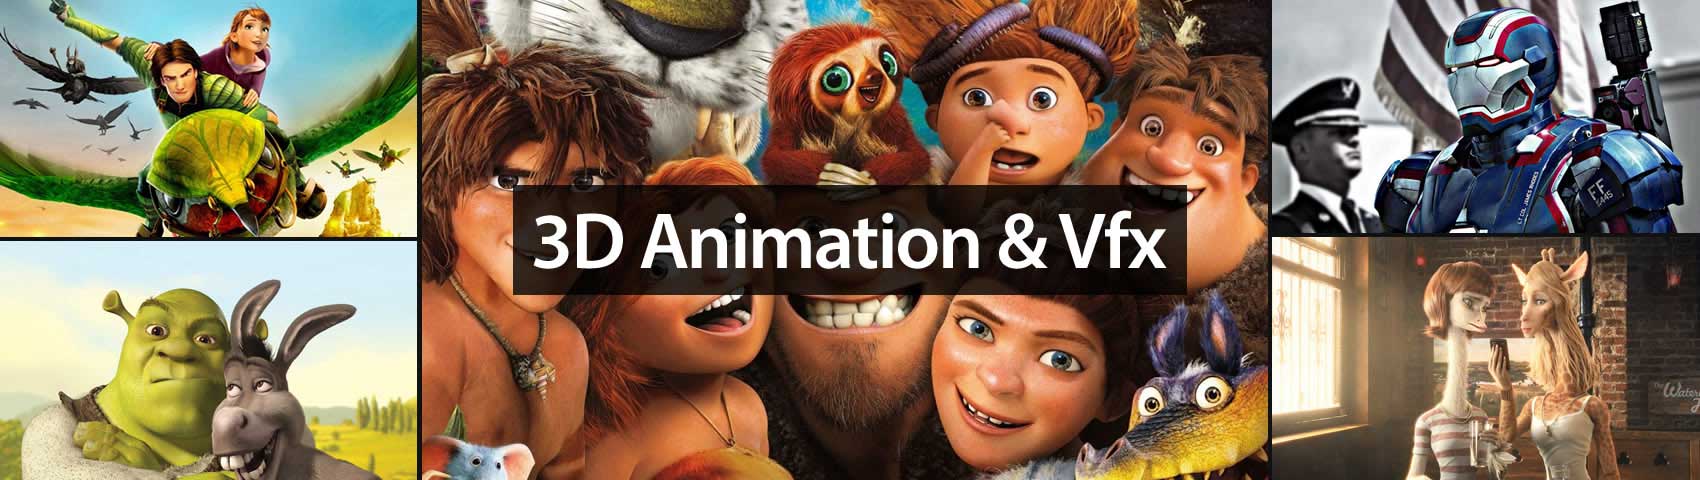 VFX & Animation Career Courses Institute in Anand - Arena Animation Anand